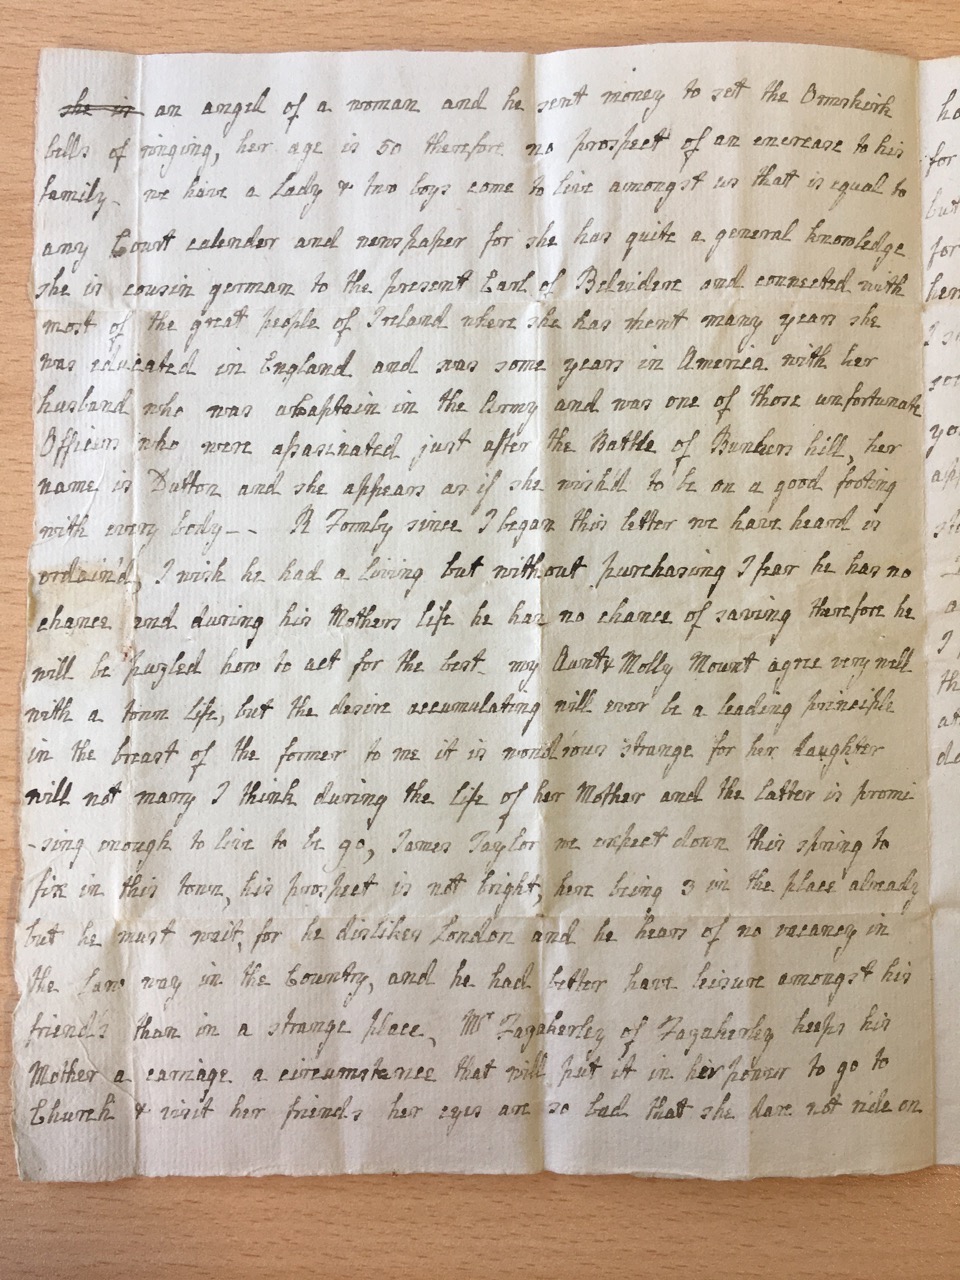 Image #2 of letter: J[enny] Brownsword to Ann Hare 5 January 1783